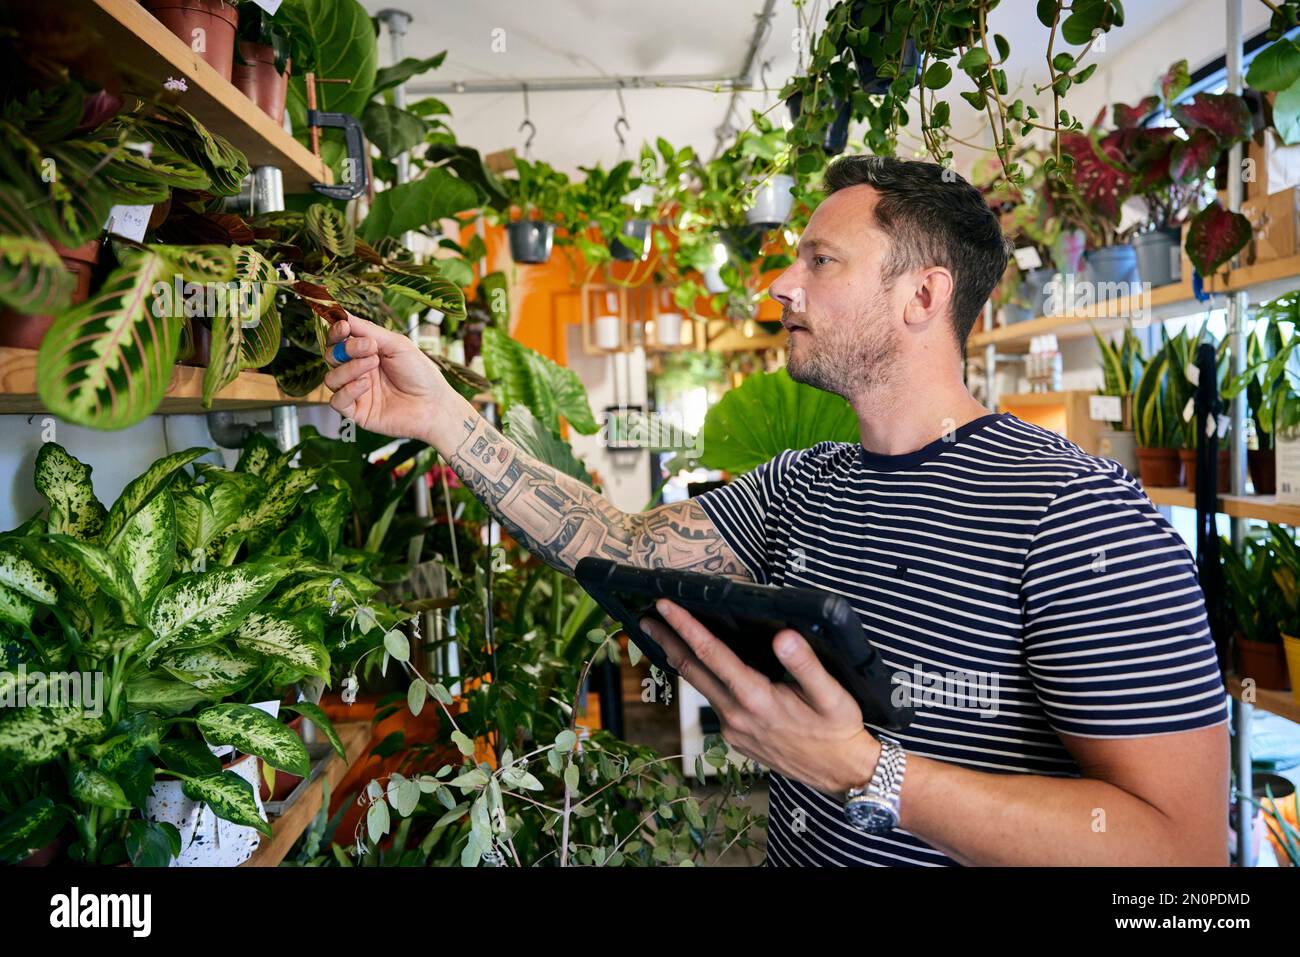 Man with tattoos working in flower shop checking stock using a tablet Stock Photo